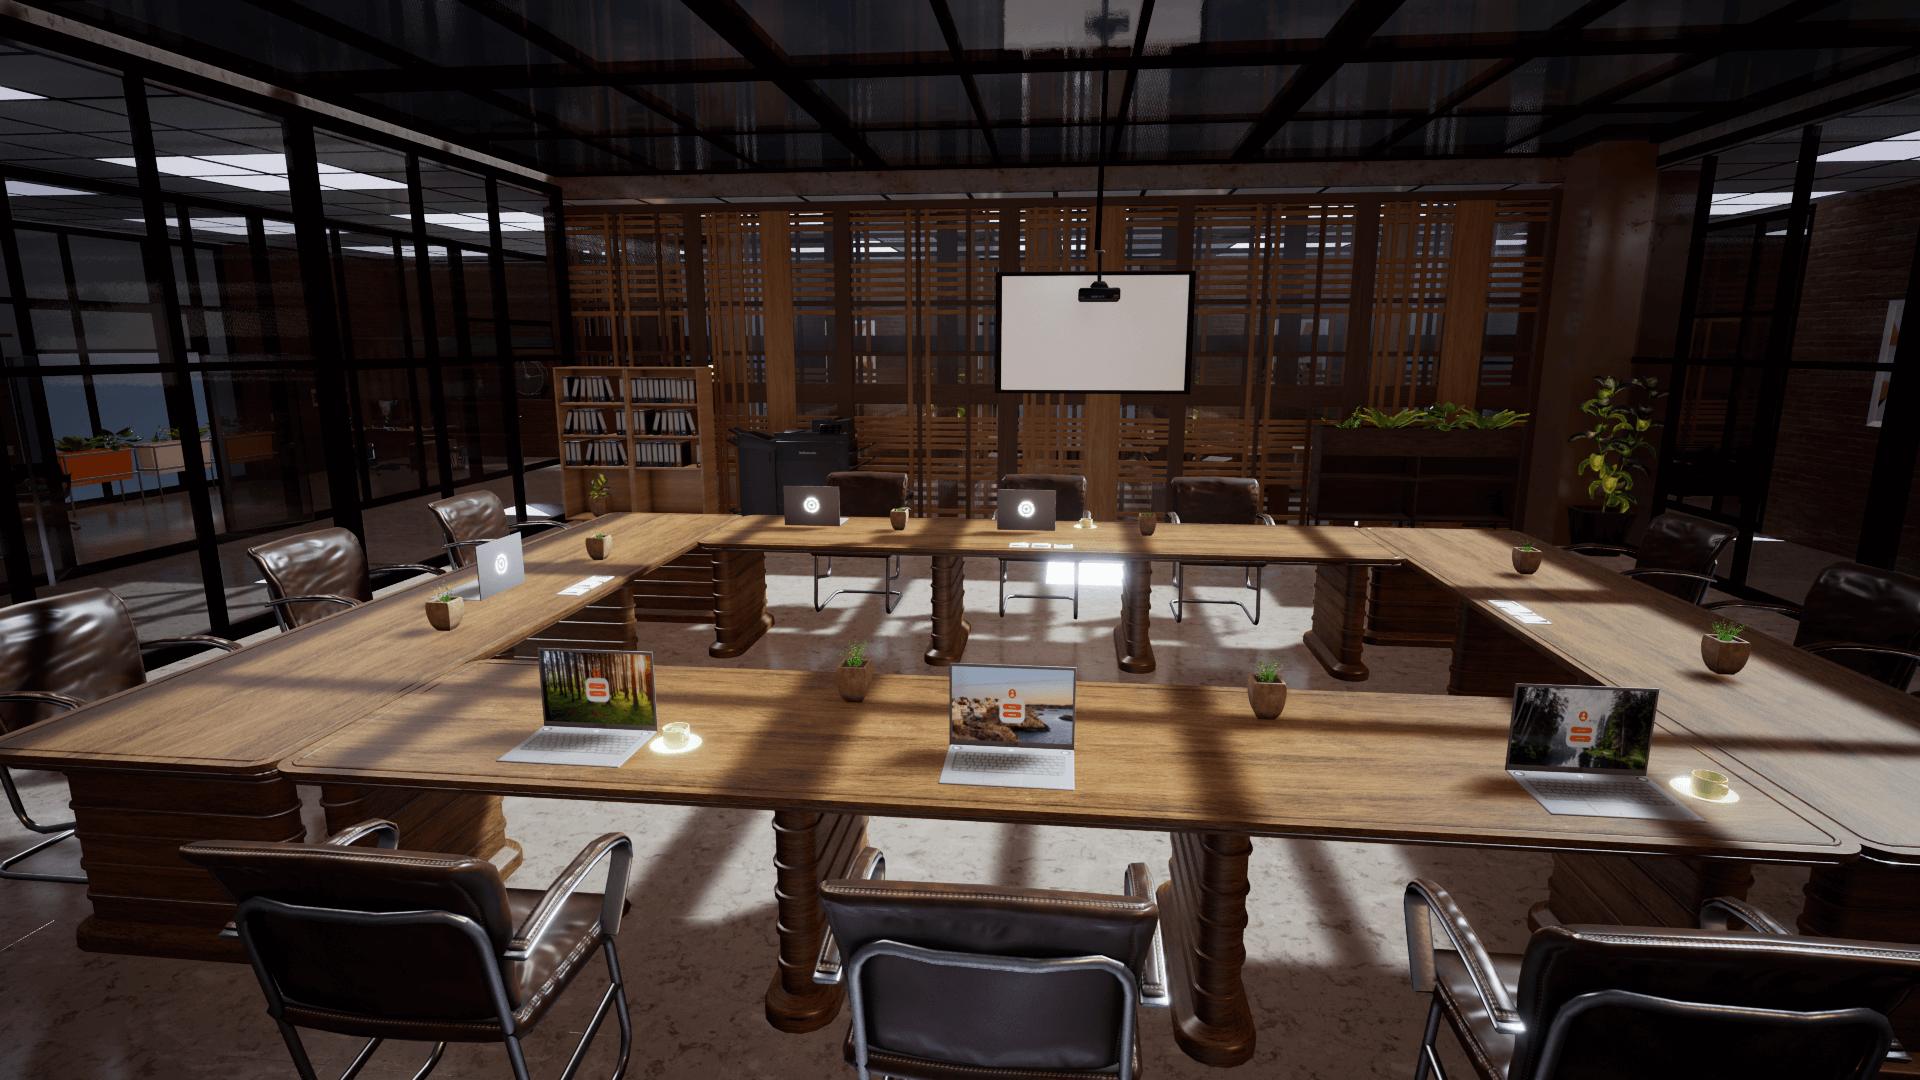 An image showing Modern Offices asset pack, created with Unreal Engine